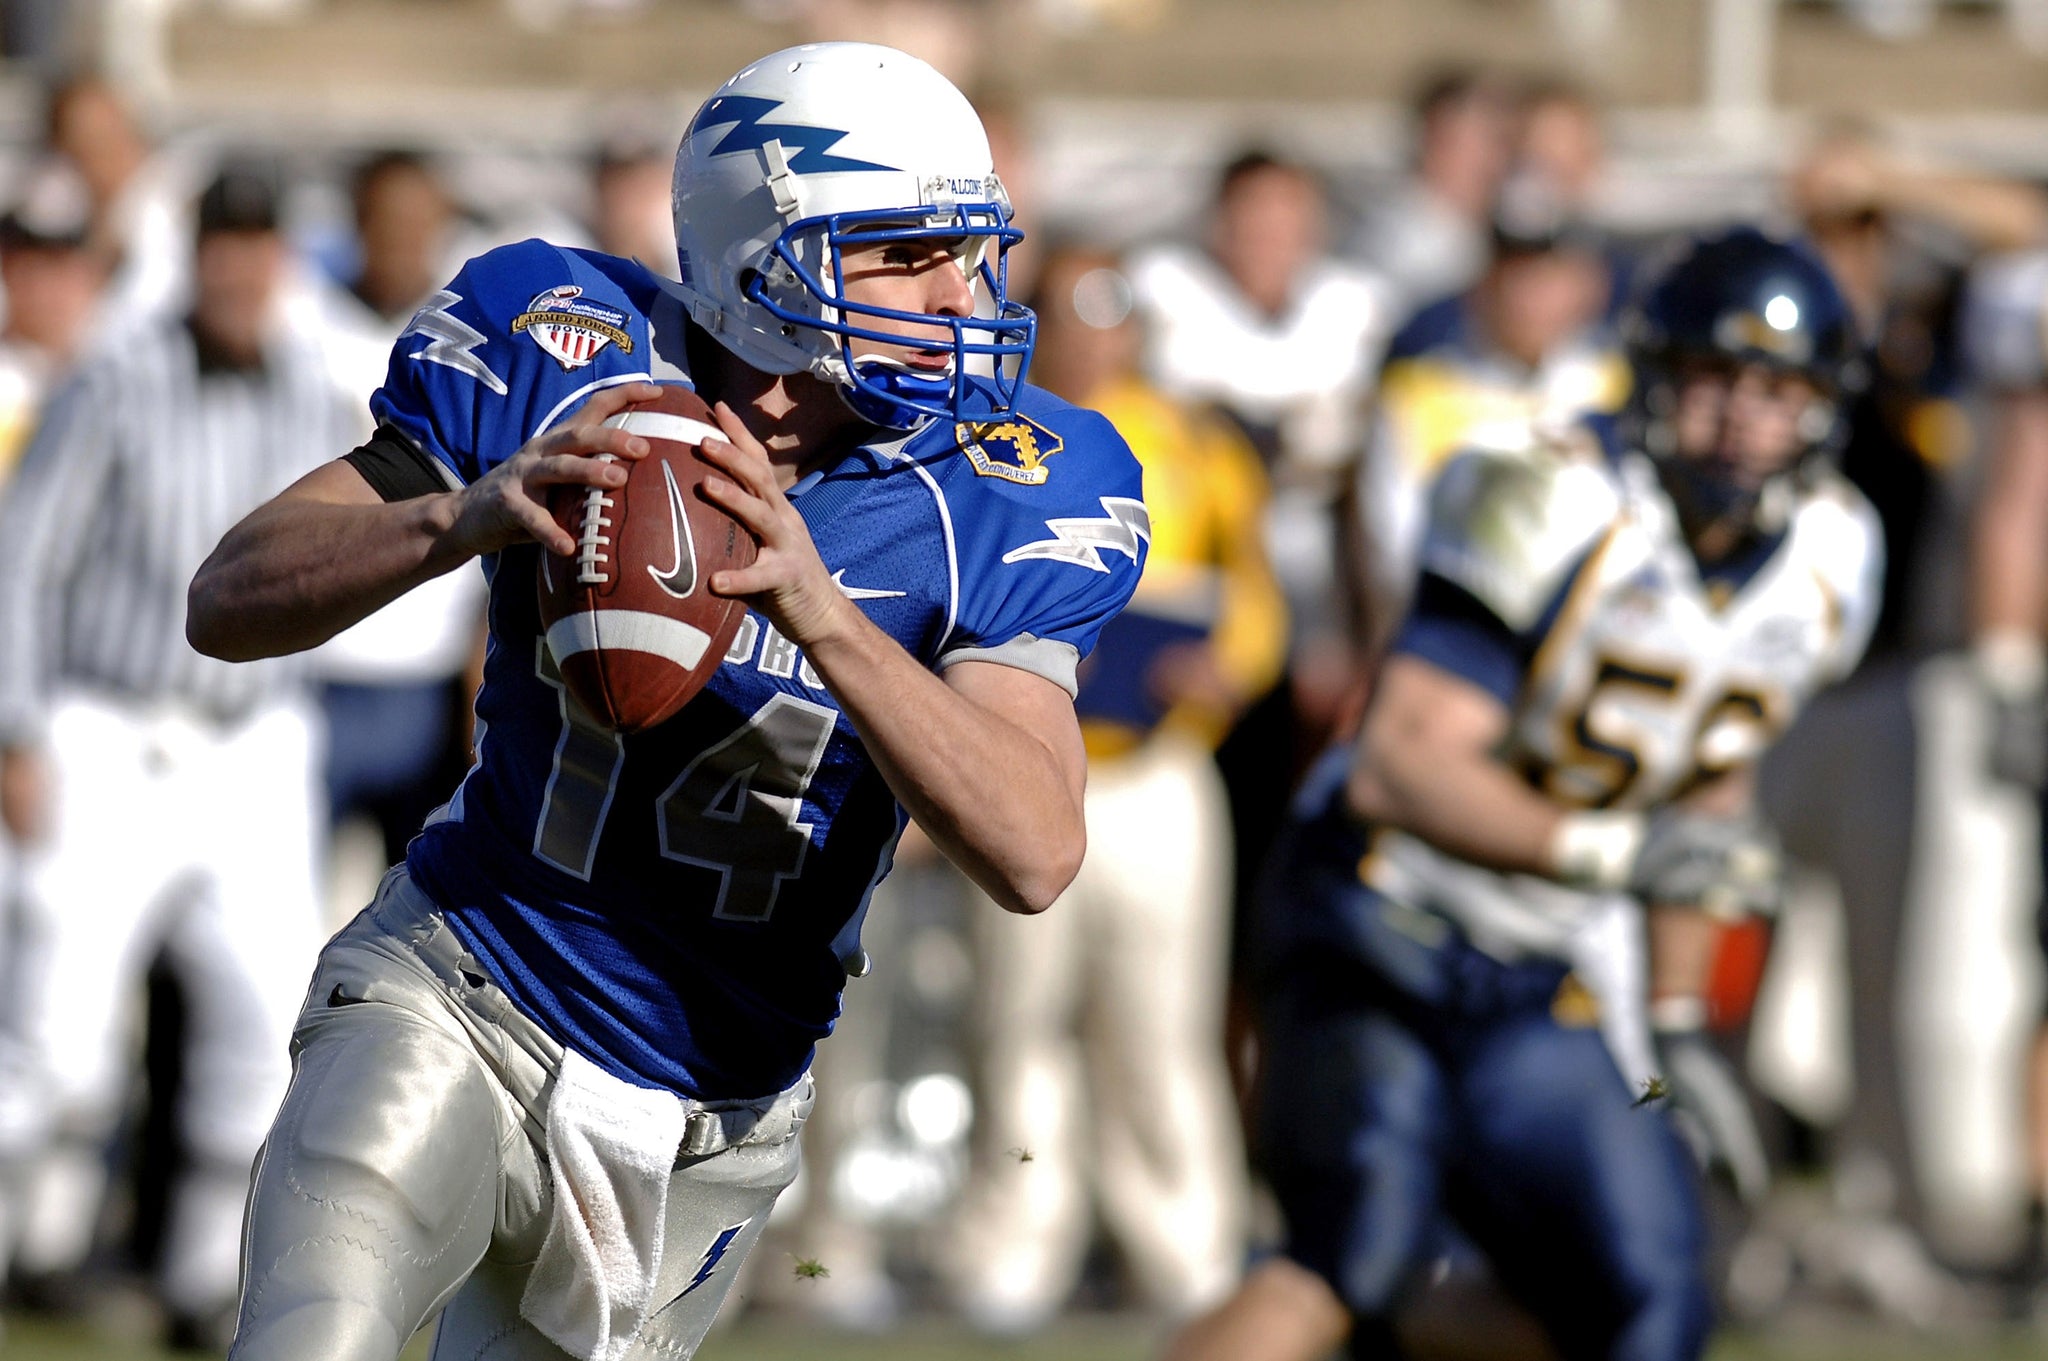 Quarterback, powered by collagen, one of the top sports nutrition supplements, readies to pass the ball to a running back